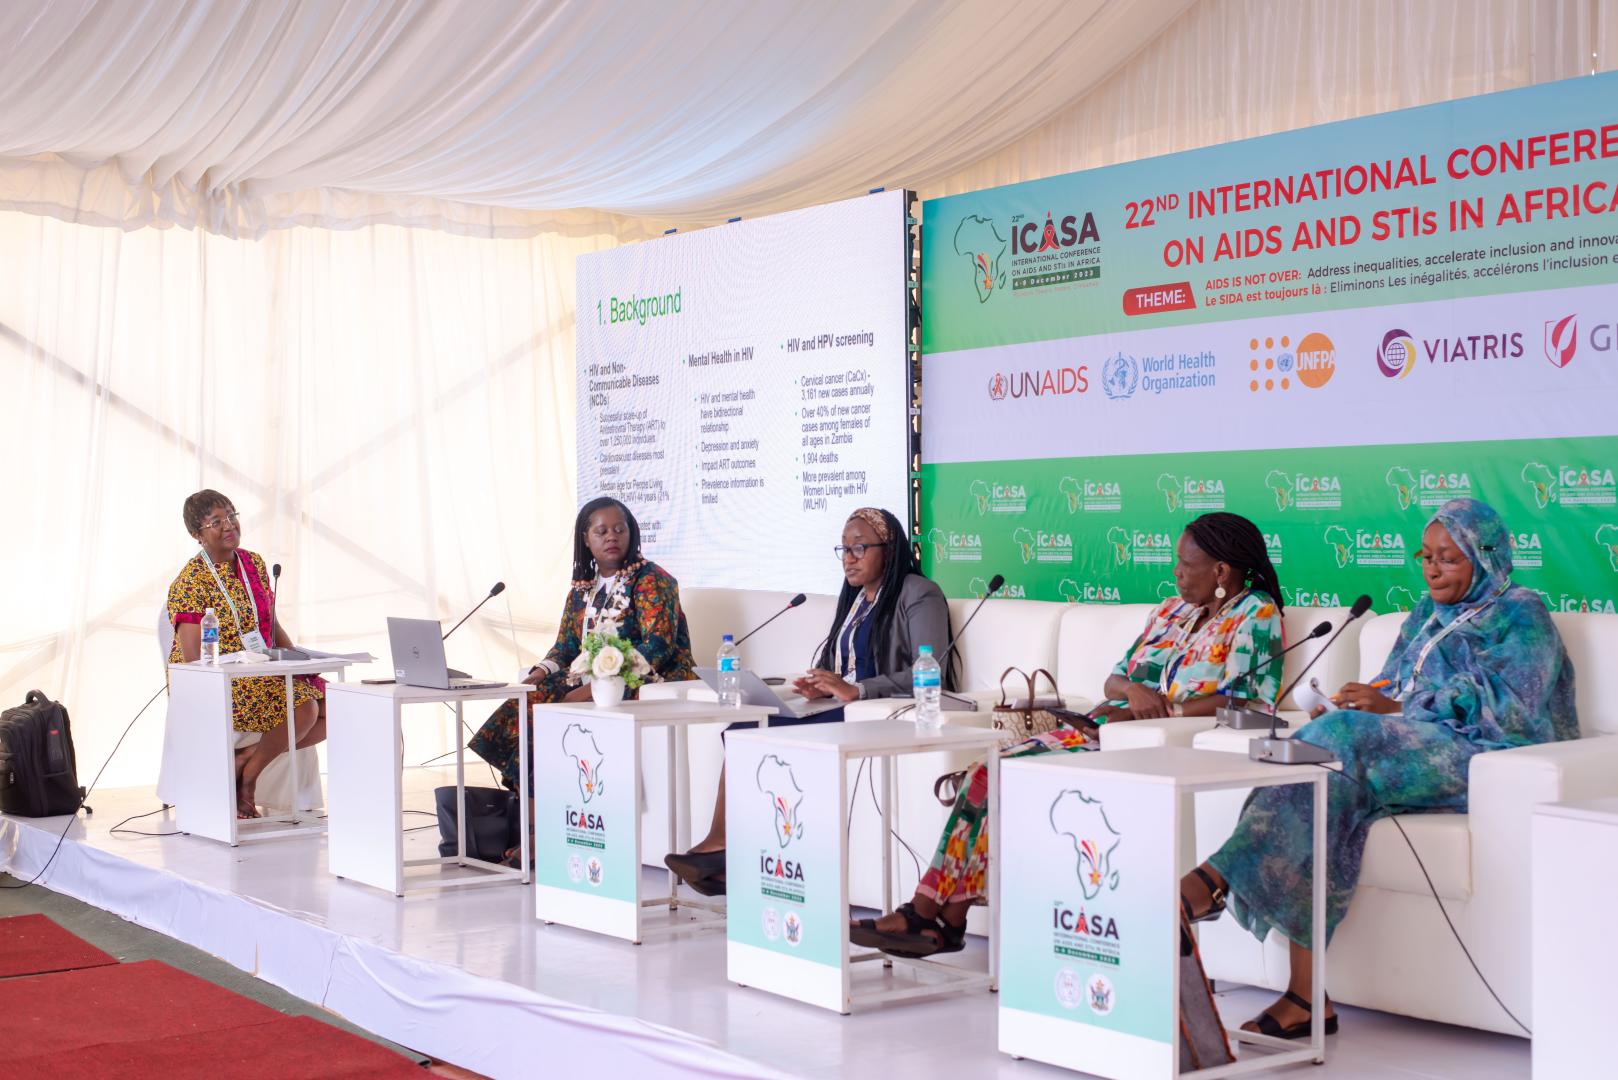 World Health Organization (WHO) led session at the International Conference on AIDS and STIs in Africa (ICASA). The session, titled "Improving HIV & TB outcomes through noncommunicable disease integration," highlighted the enhanced outcomes achieved through this approach.